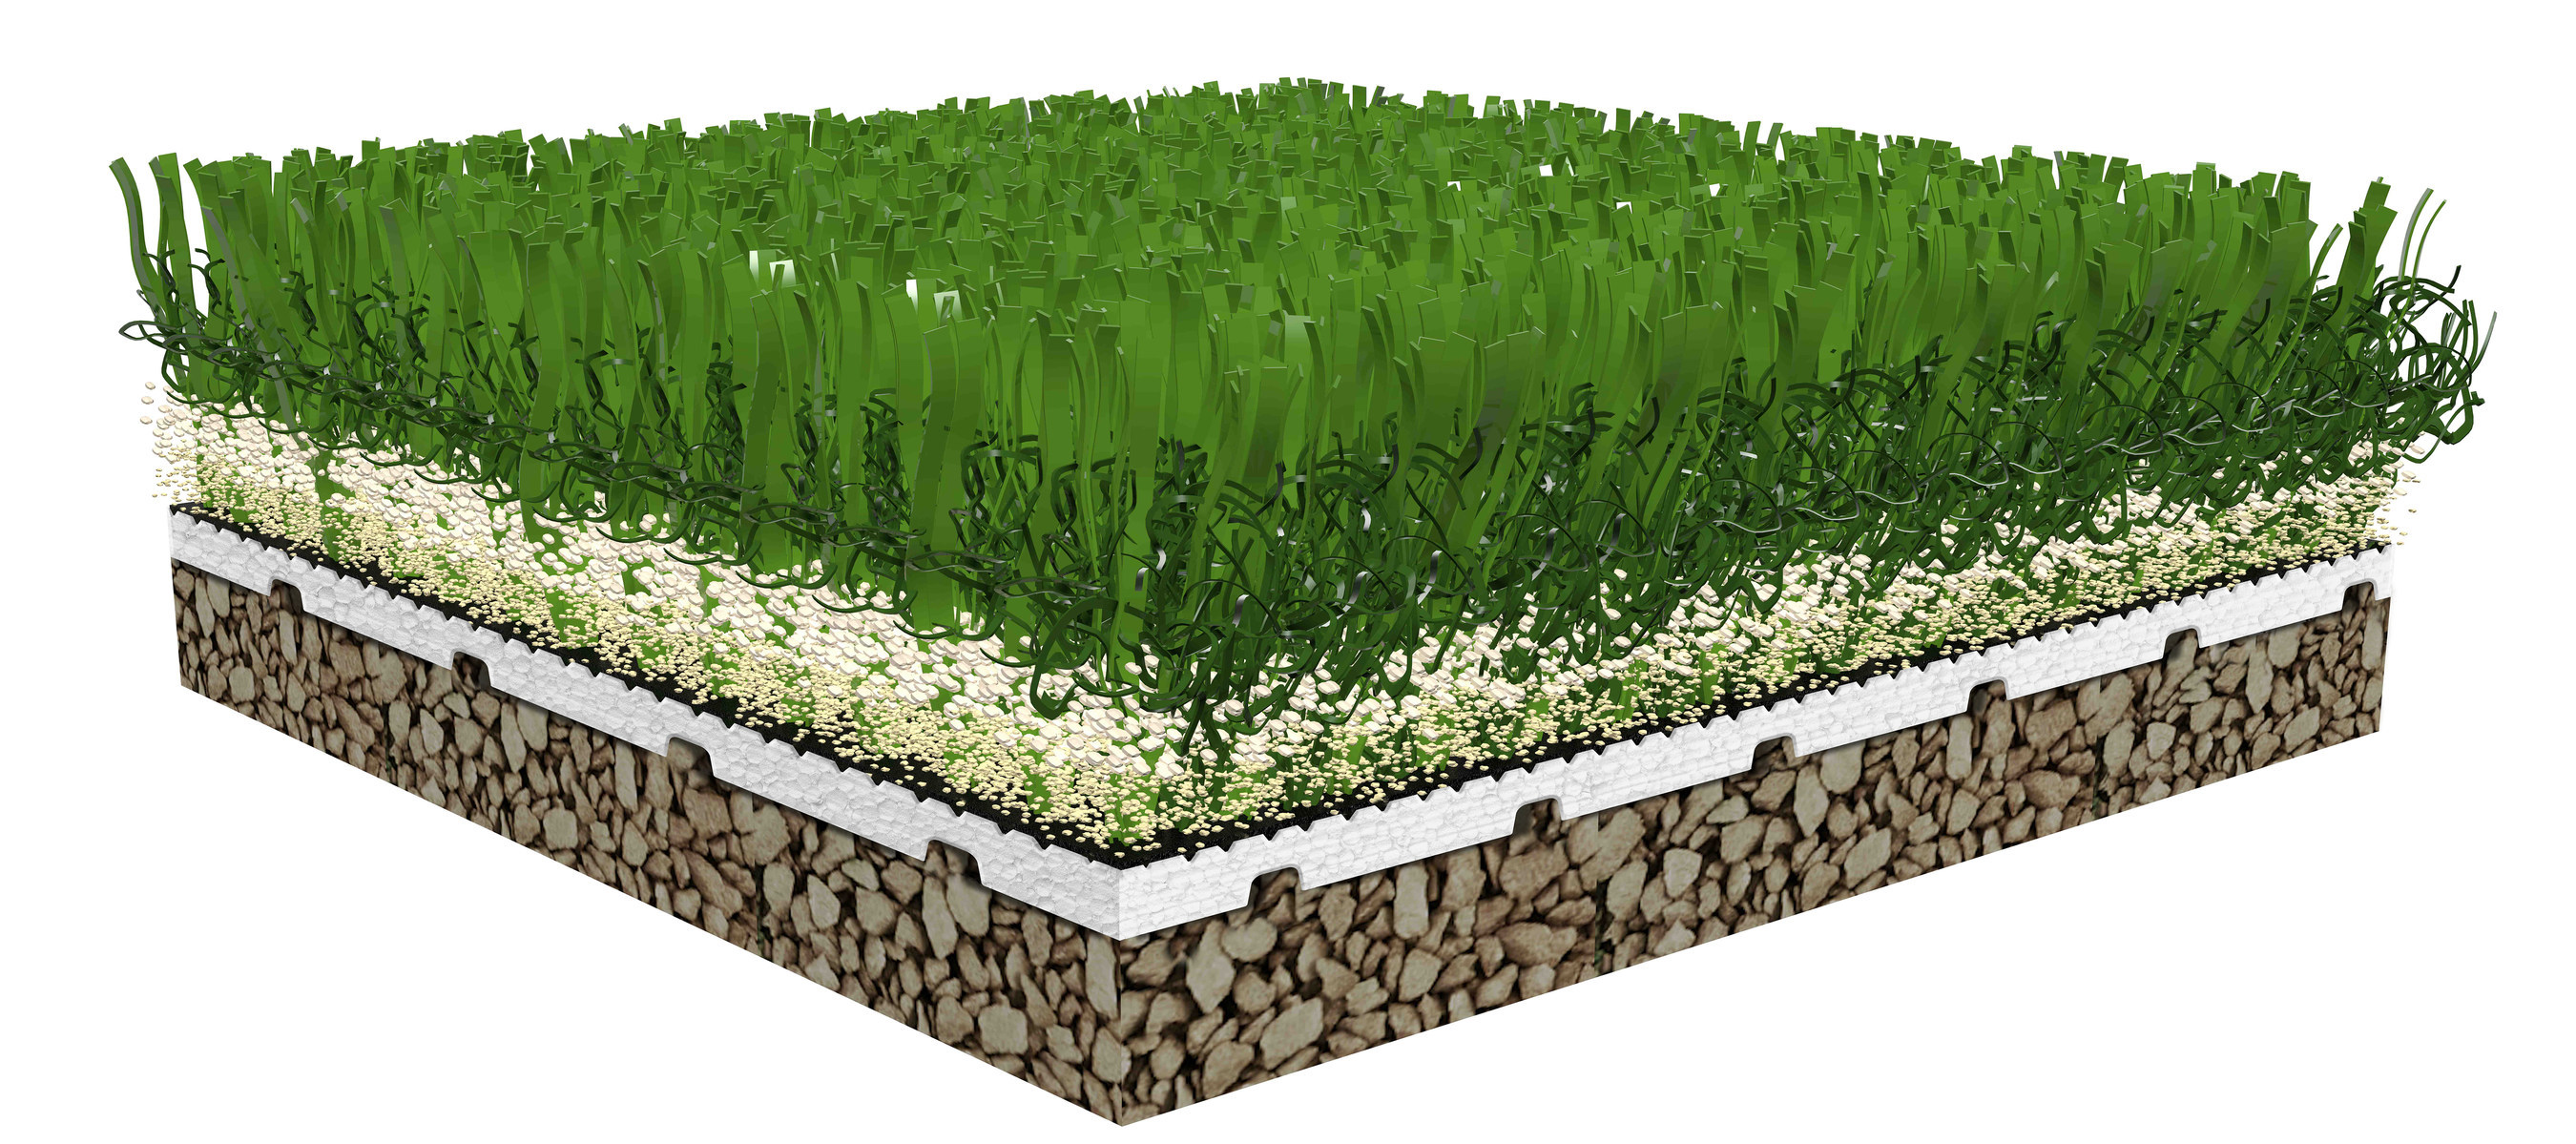 Astro Turf Archives - Multi-Flor